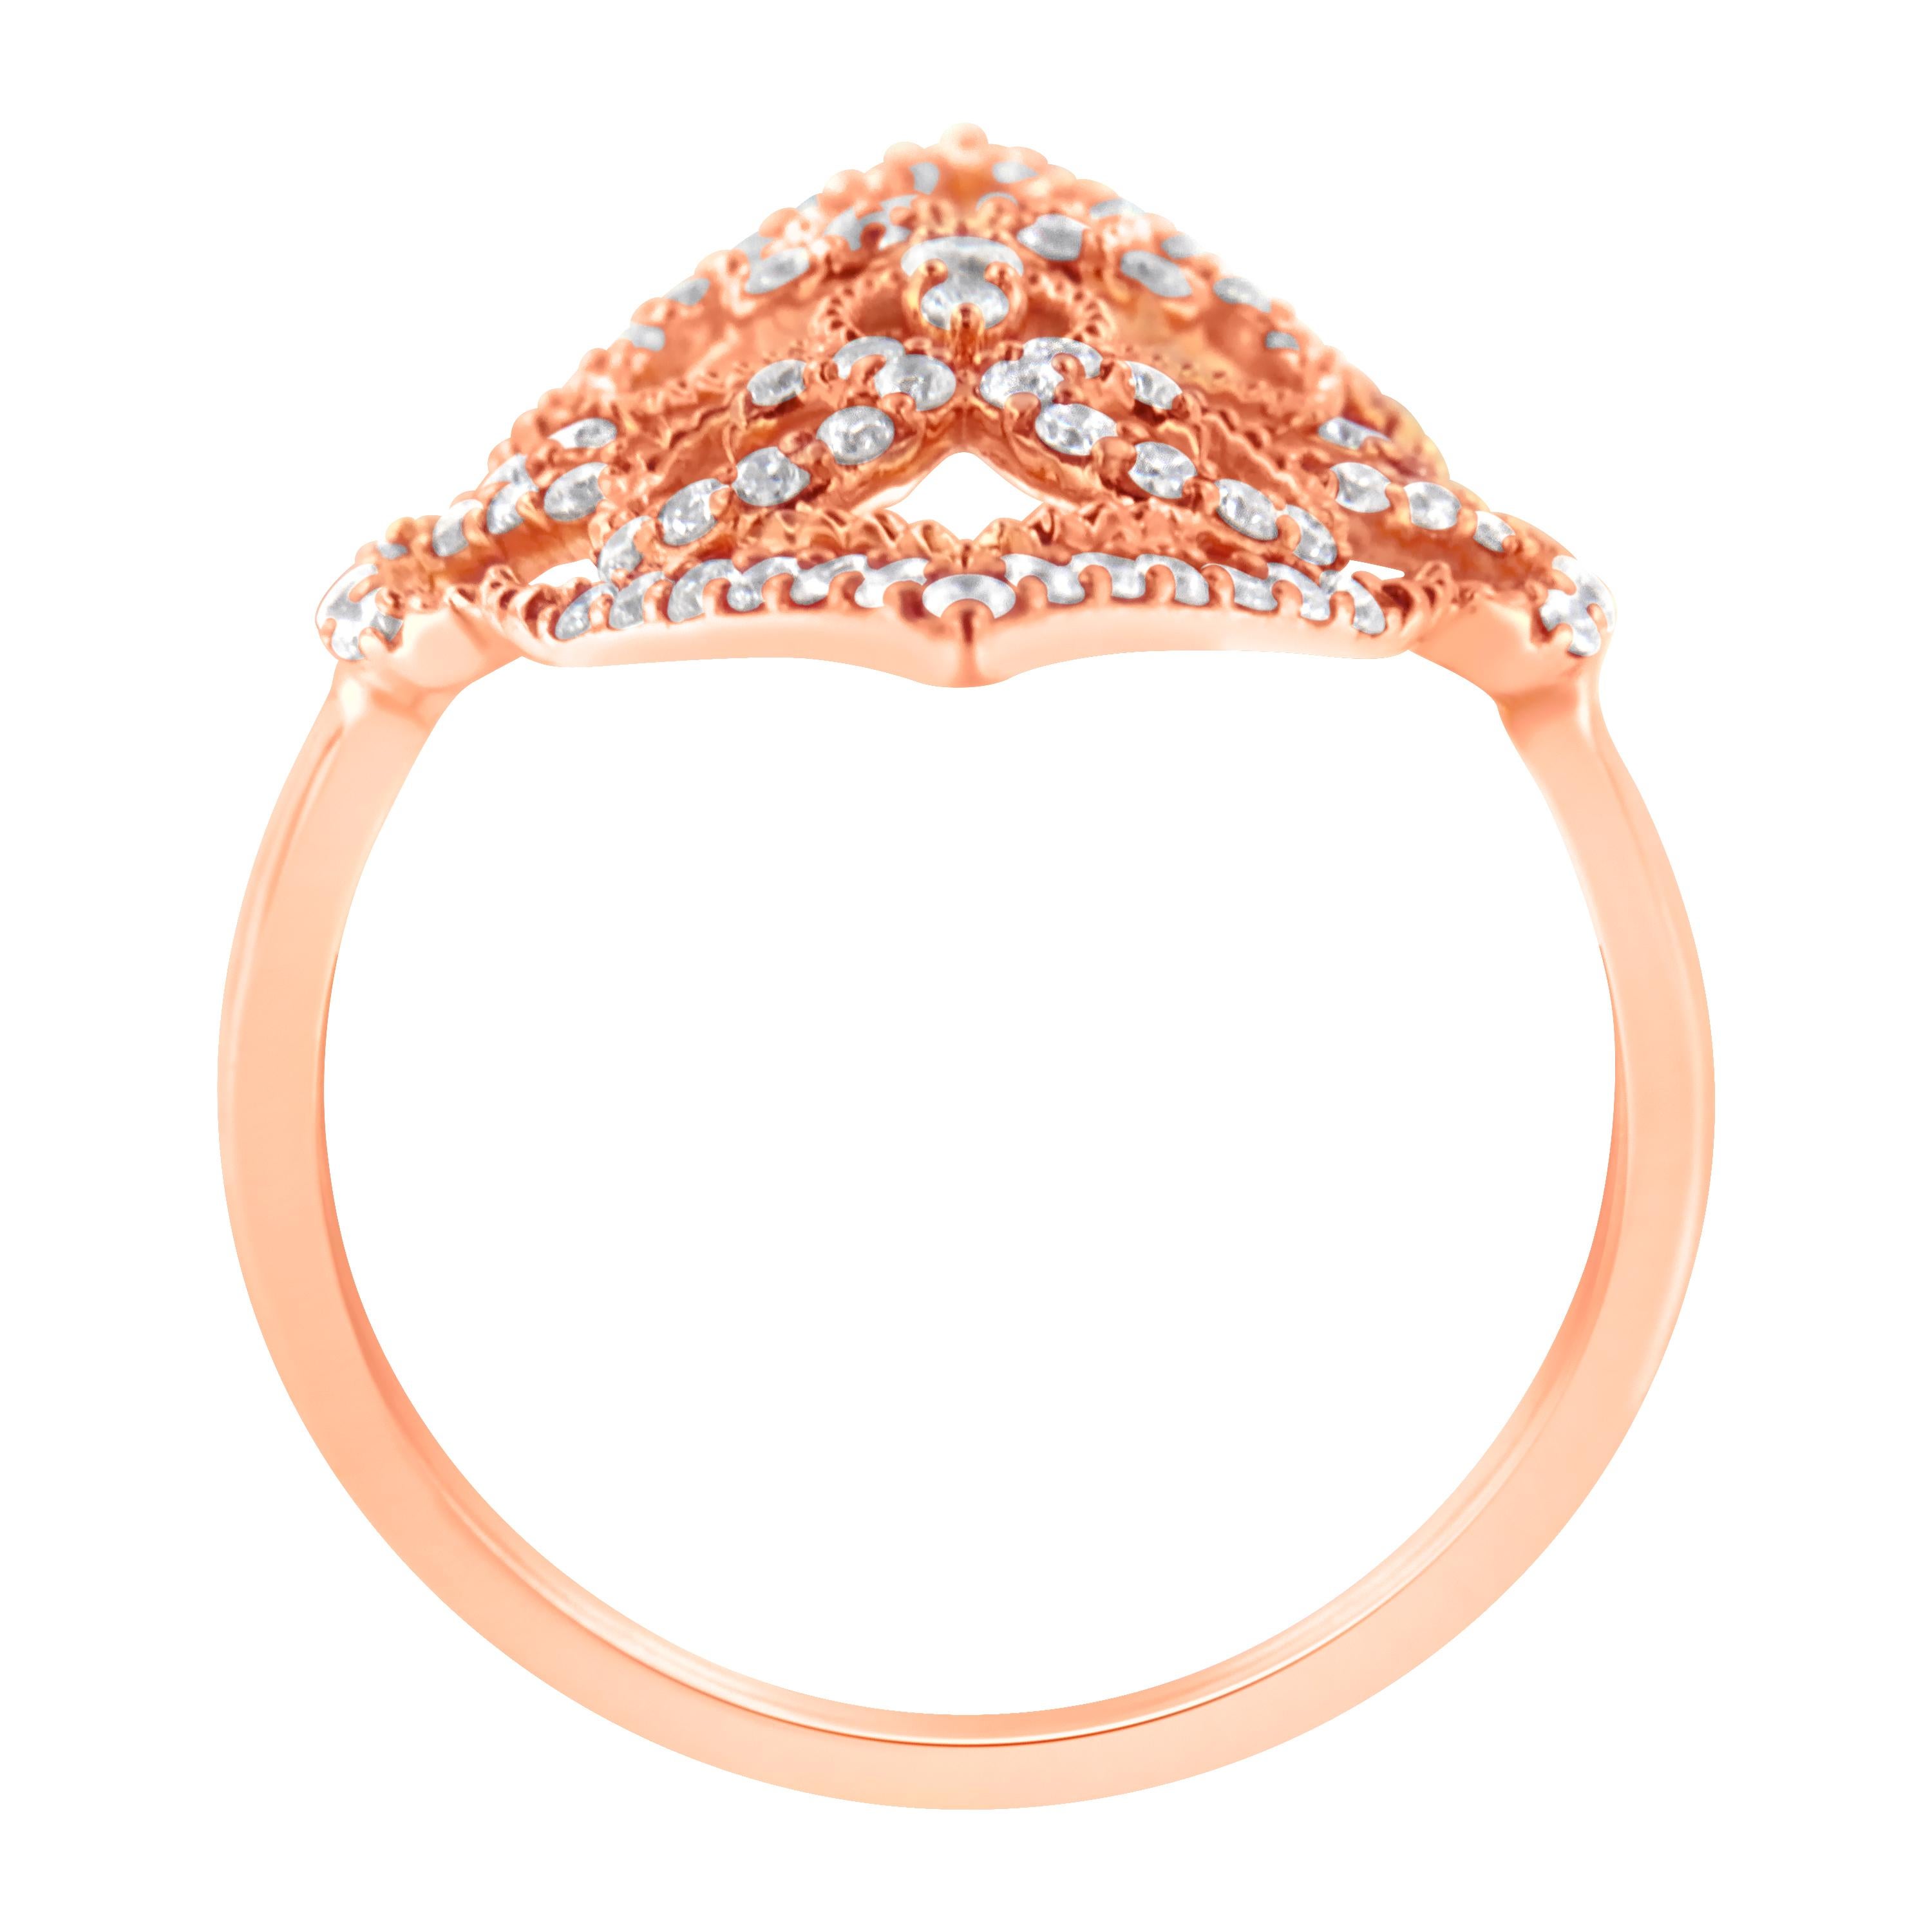 This intricately designed cocktail ring features a central cluster of three round diamonds surrounded in an elaborate scrolled motif accented by further diamonds. Crafted in 10 karat rose gold, it adds a dramatic touch to any outfit. It has a total